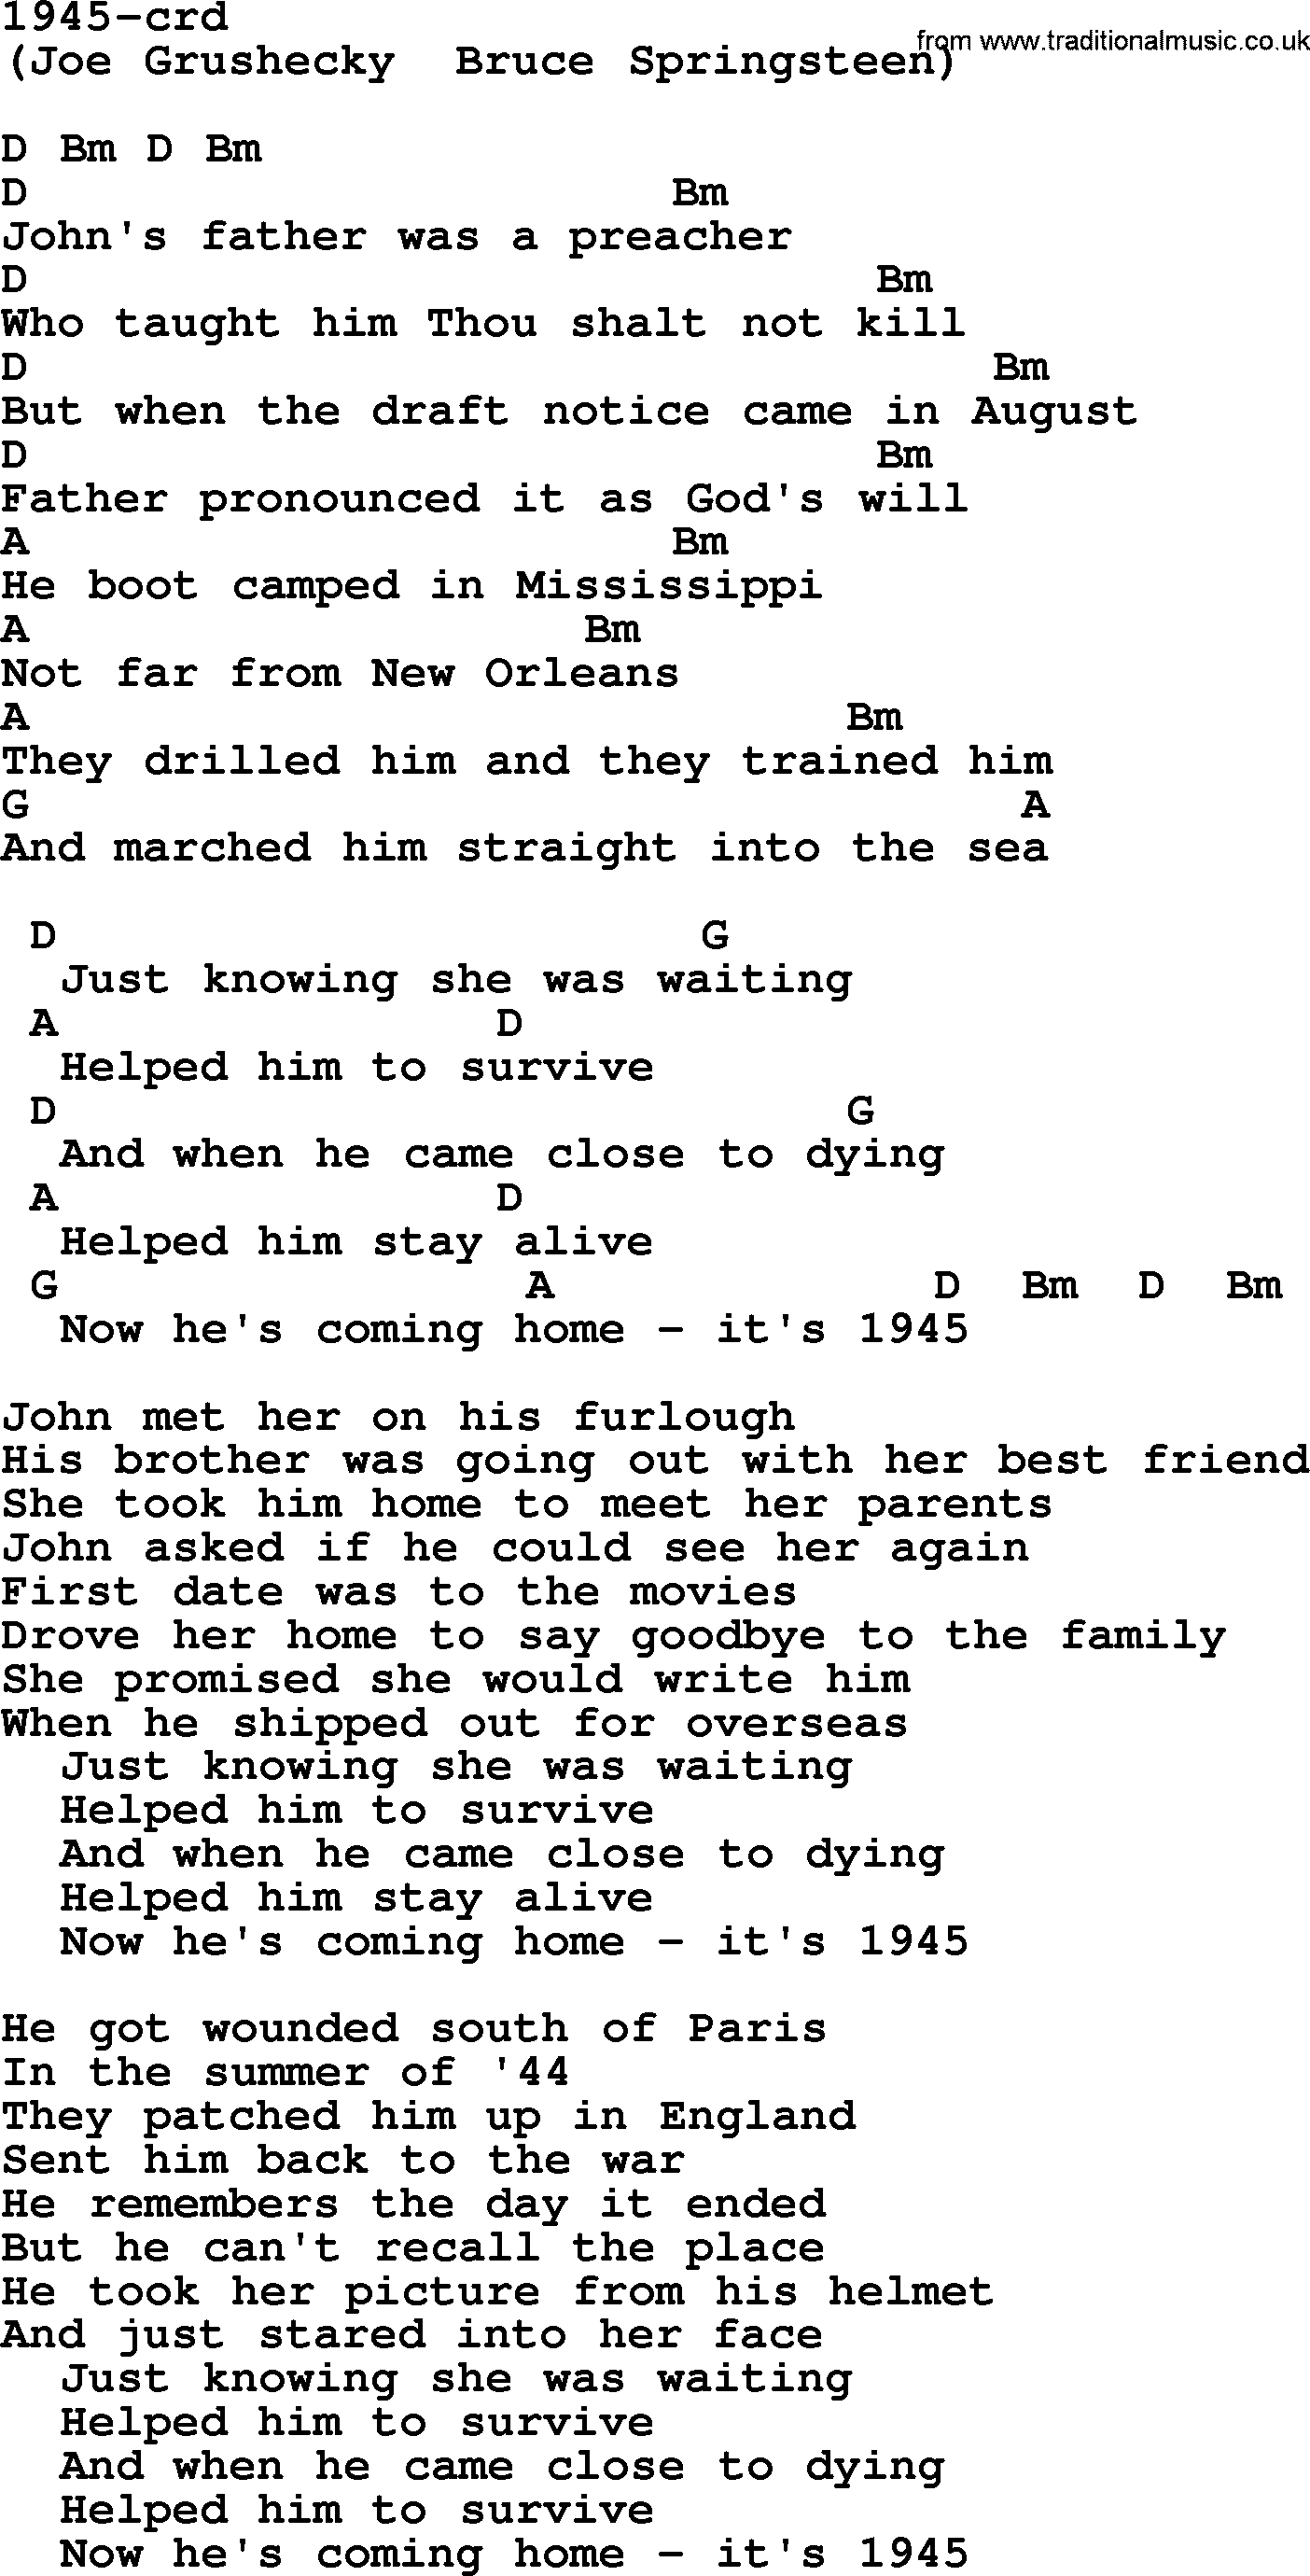 Bruce Springsteen song:: 1945, lyrics and chords